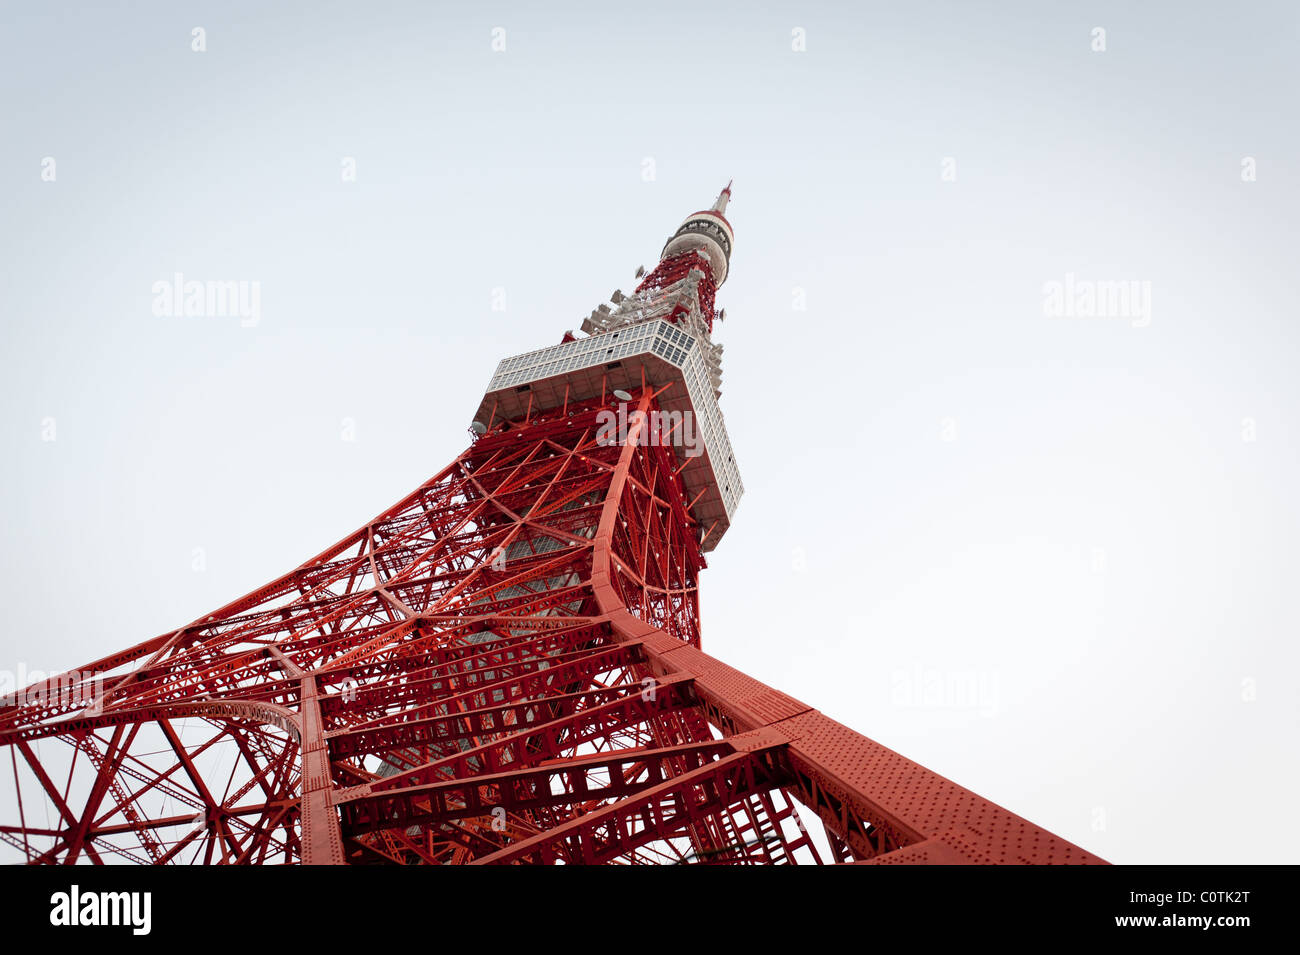 The iconic red and white Tokyo Tower in Tokyo, Japan. Stock Photo